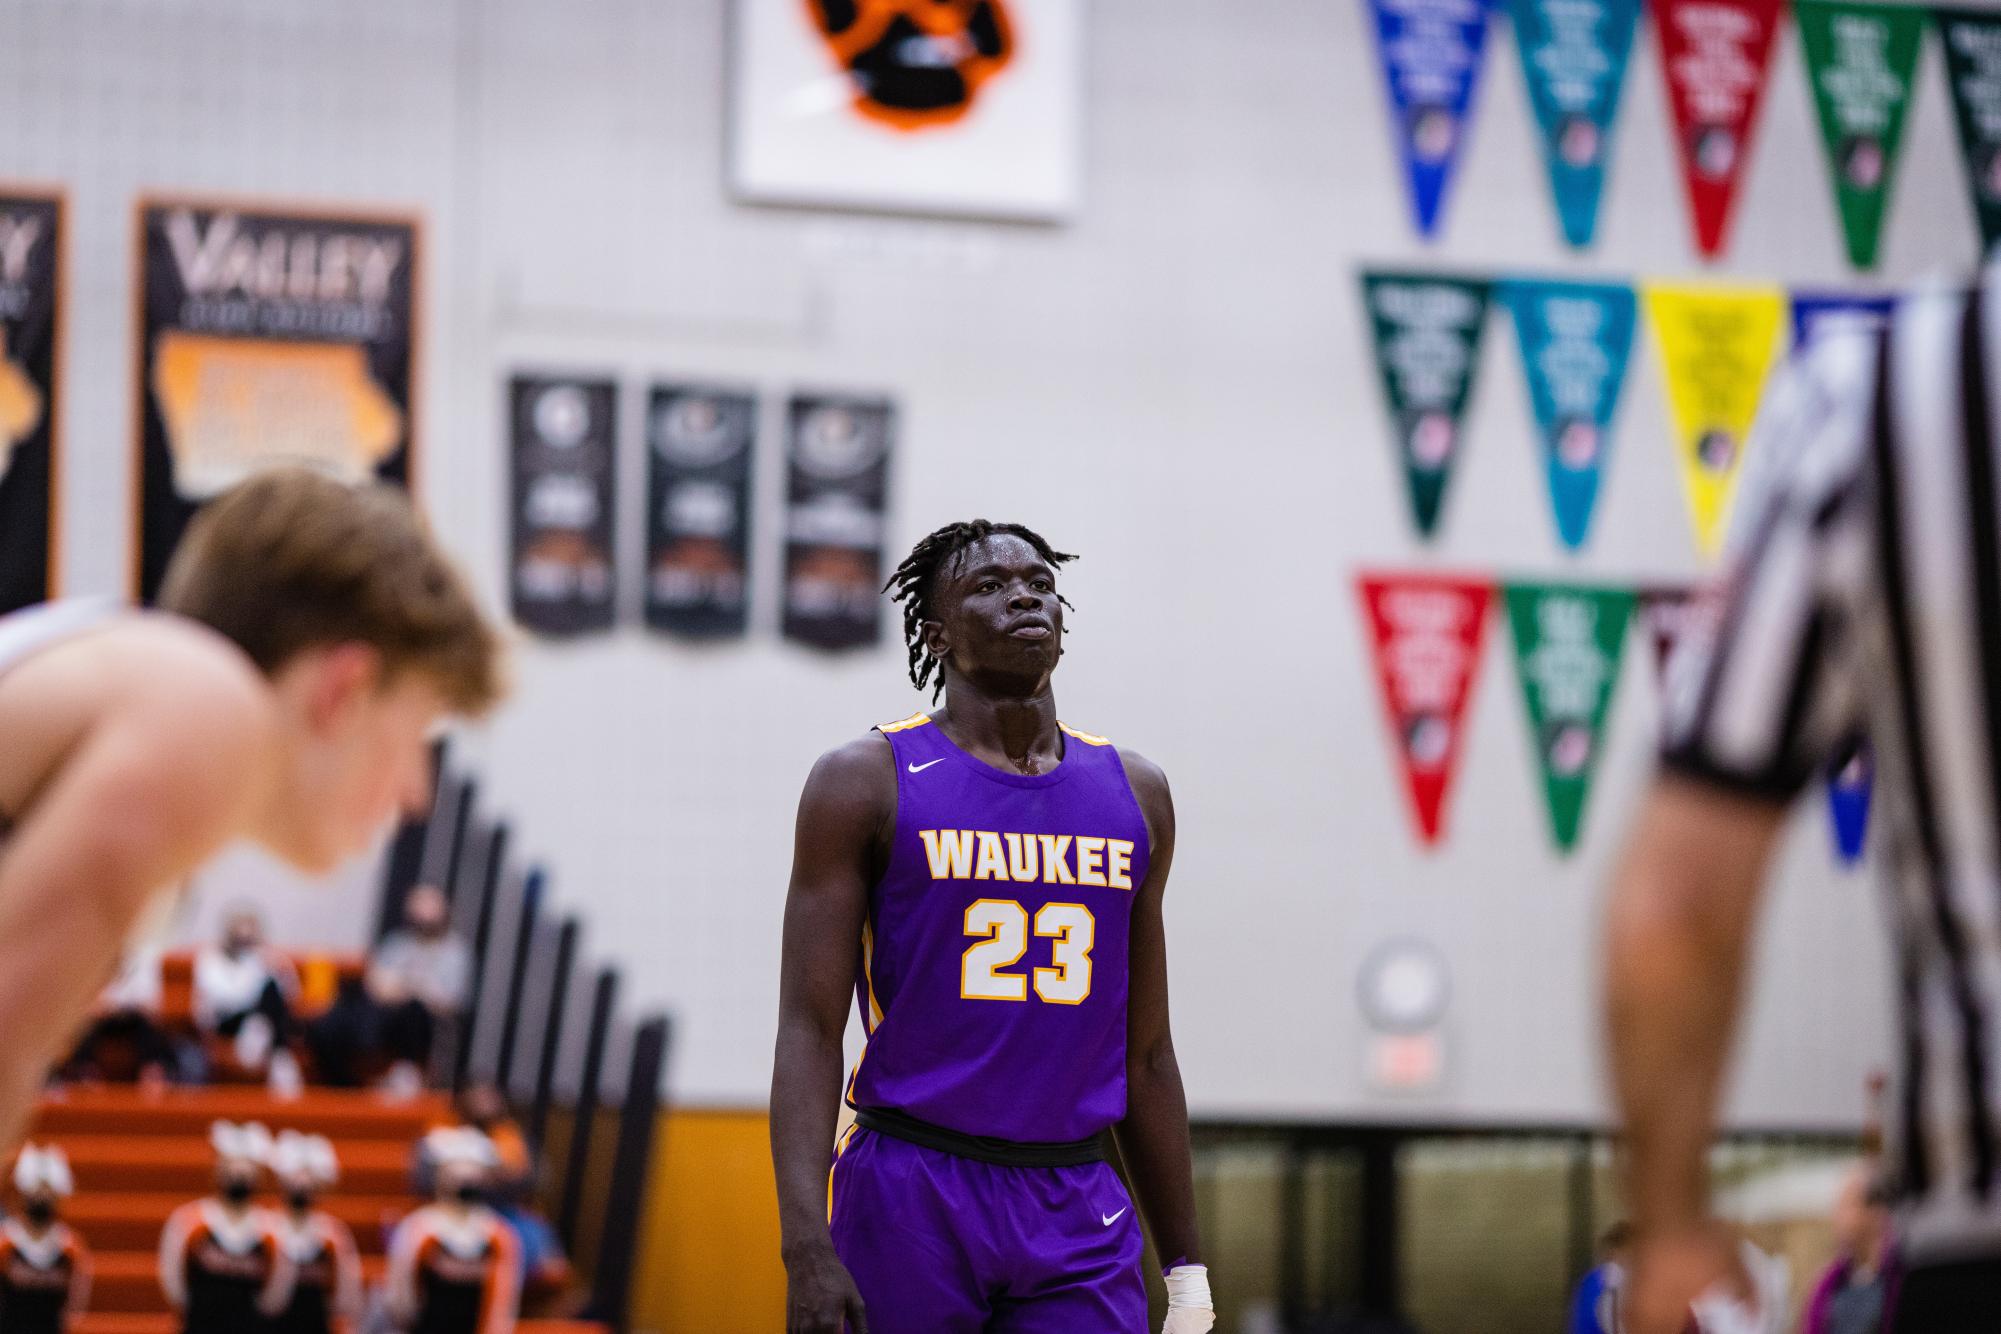 Waukee sophomore Omaha Biliew, takes a breath before shooting a free throw in a game against Valley High School, West Des Moines, Iowa, Jan. 19, 2021.